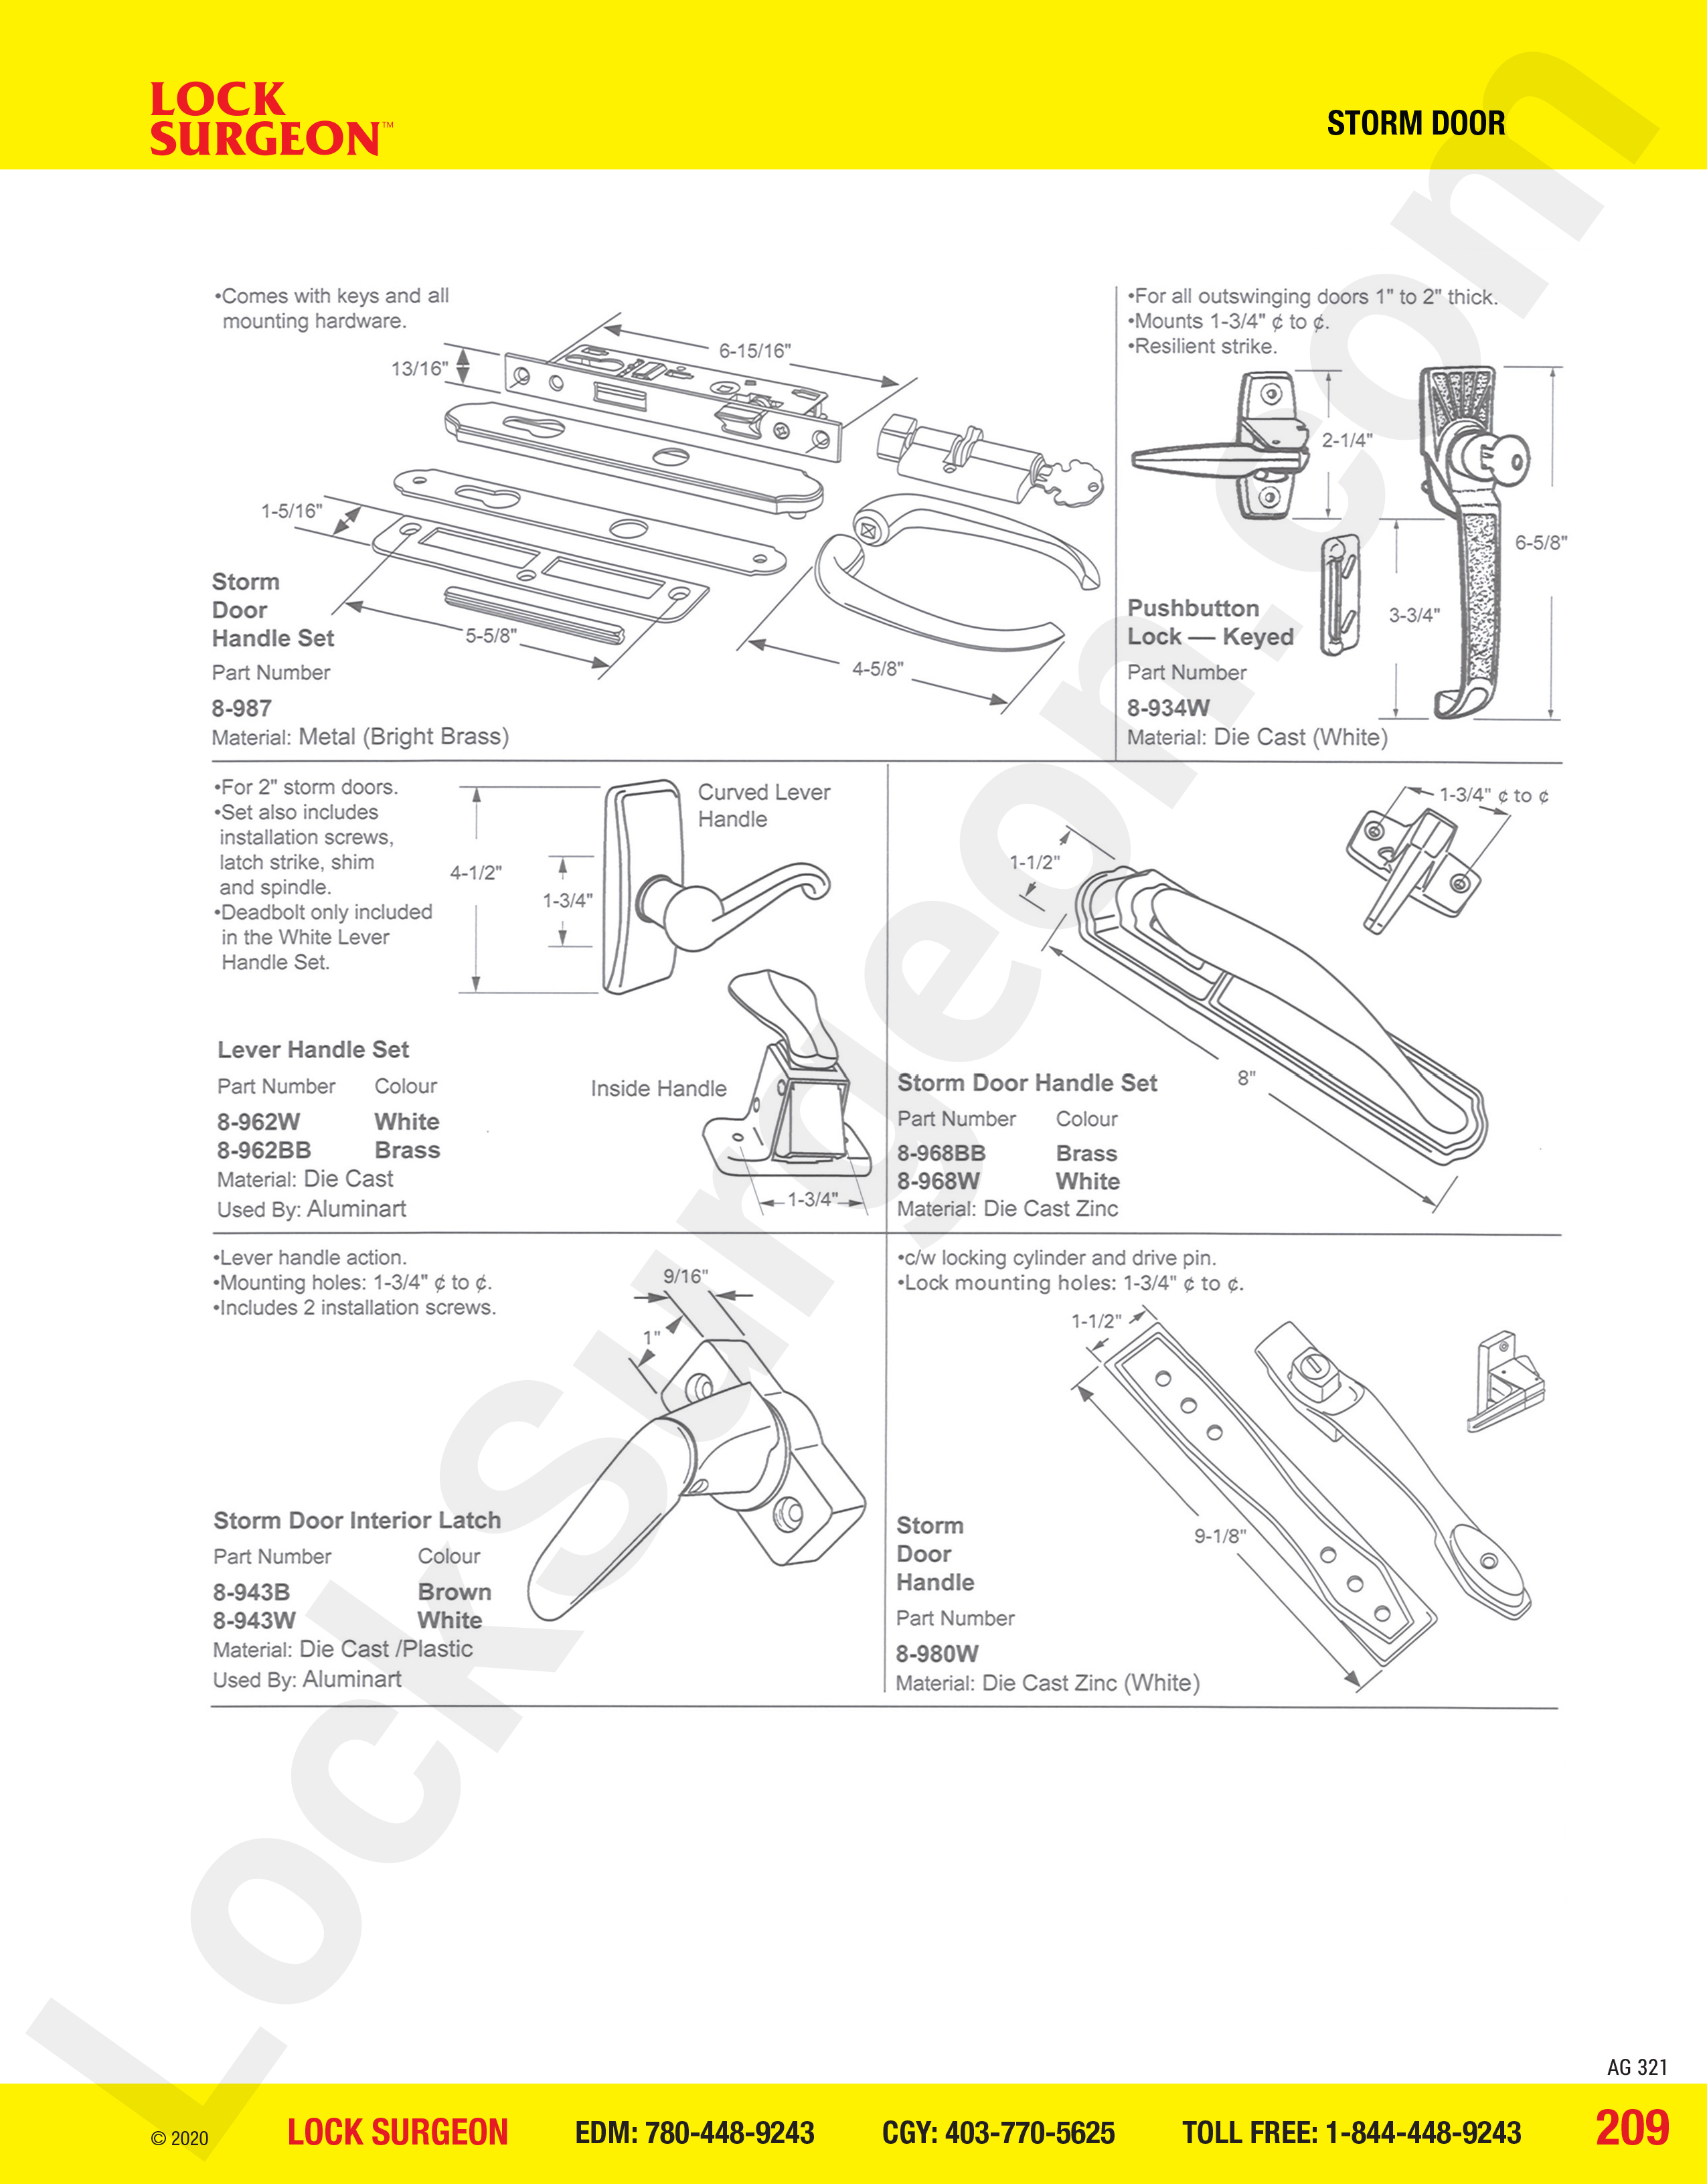 Lock Surgeon Edmonton South Storm Door handle sets for repair or replacement supplied & installed.